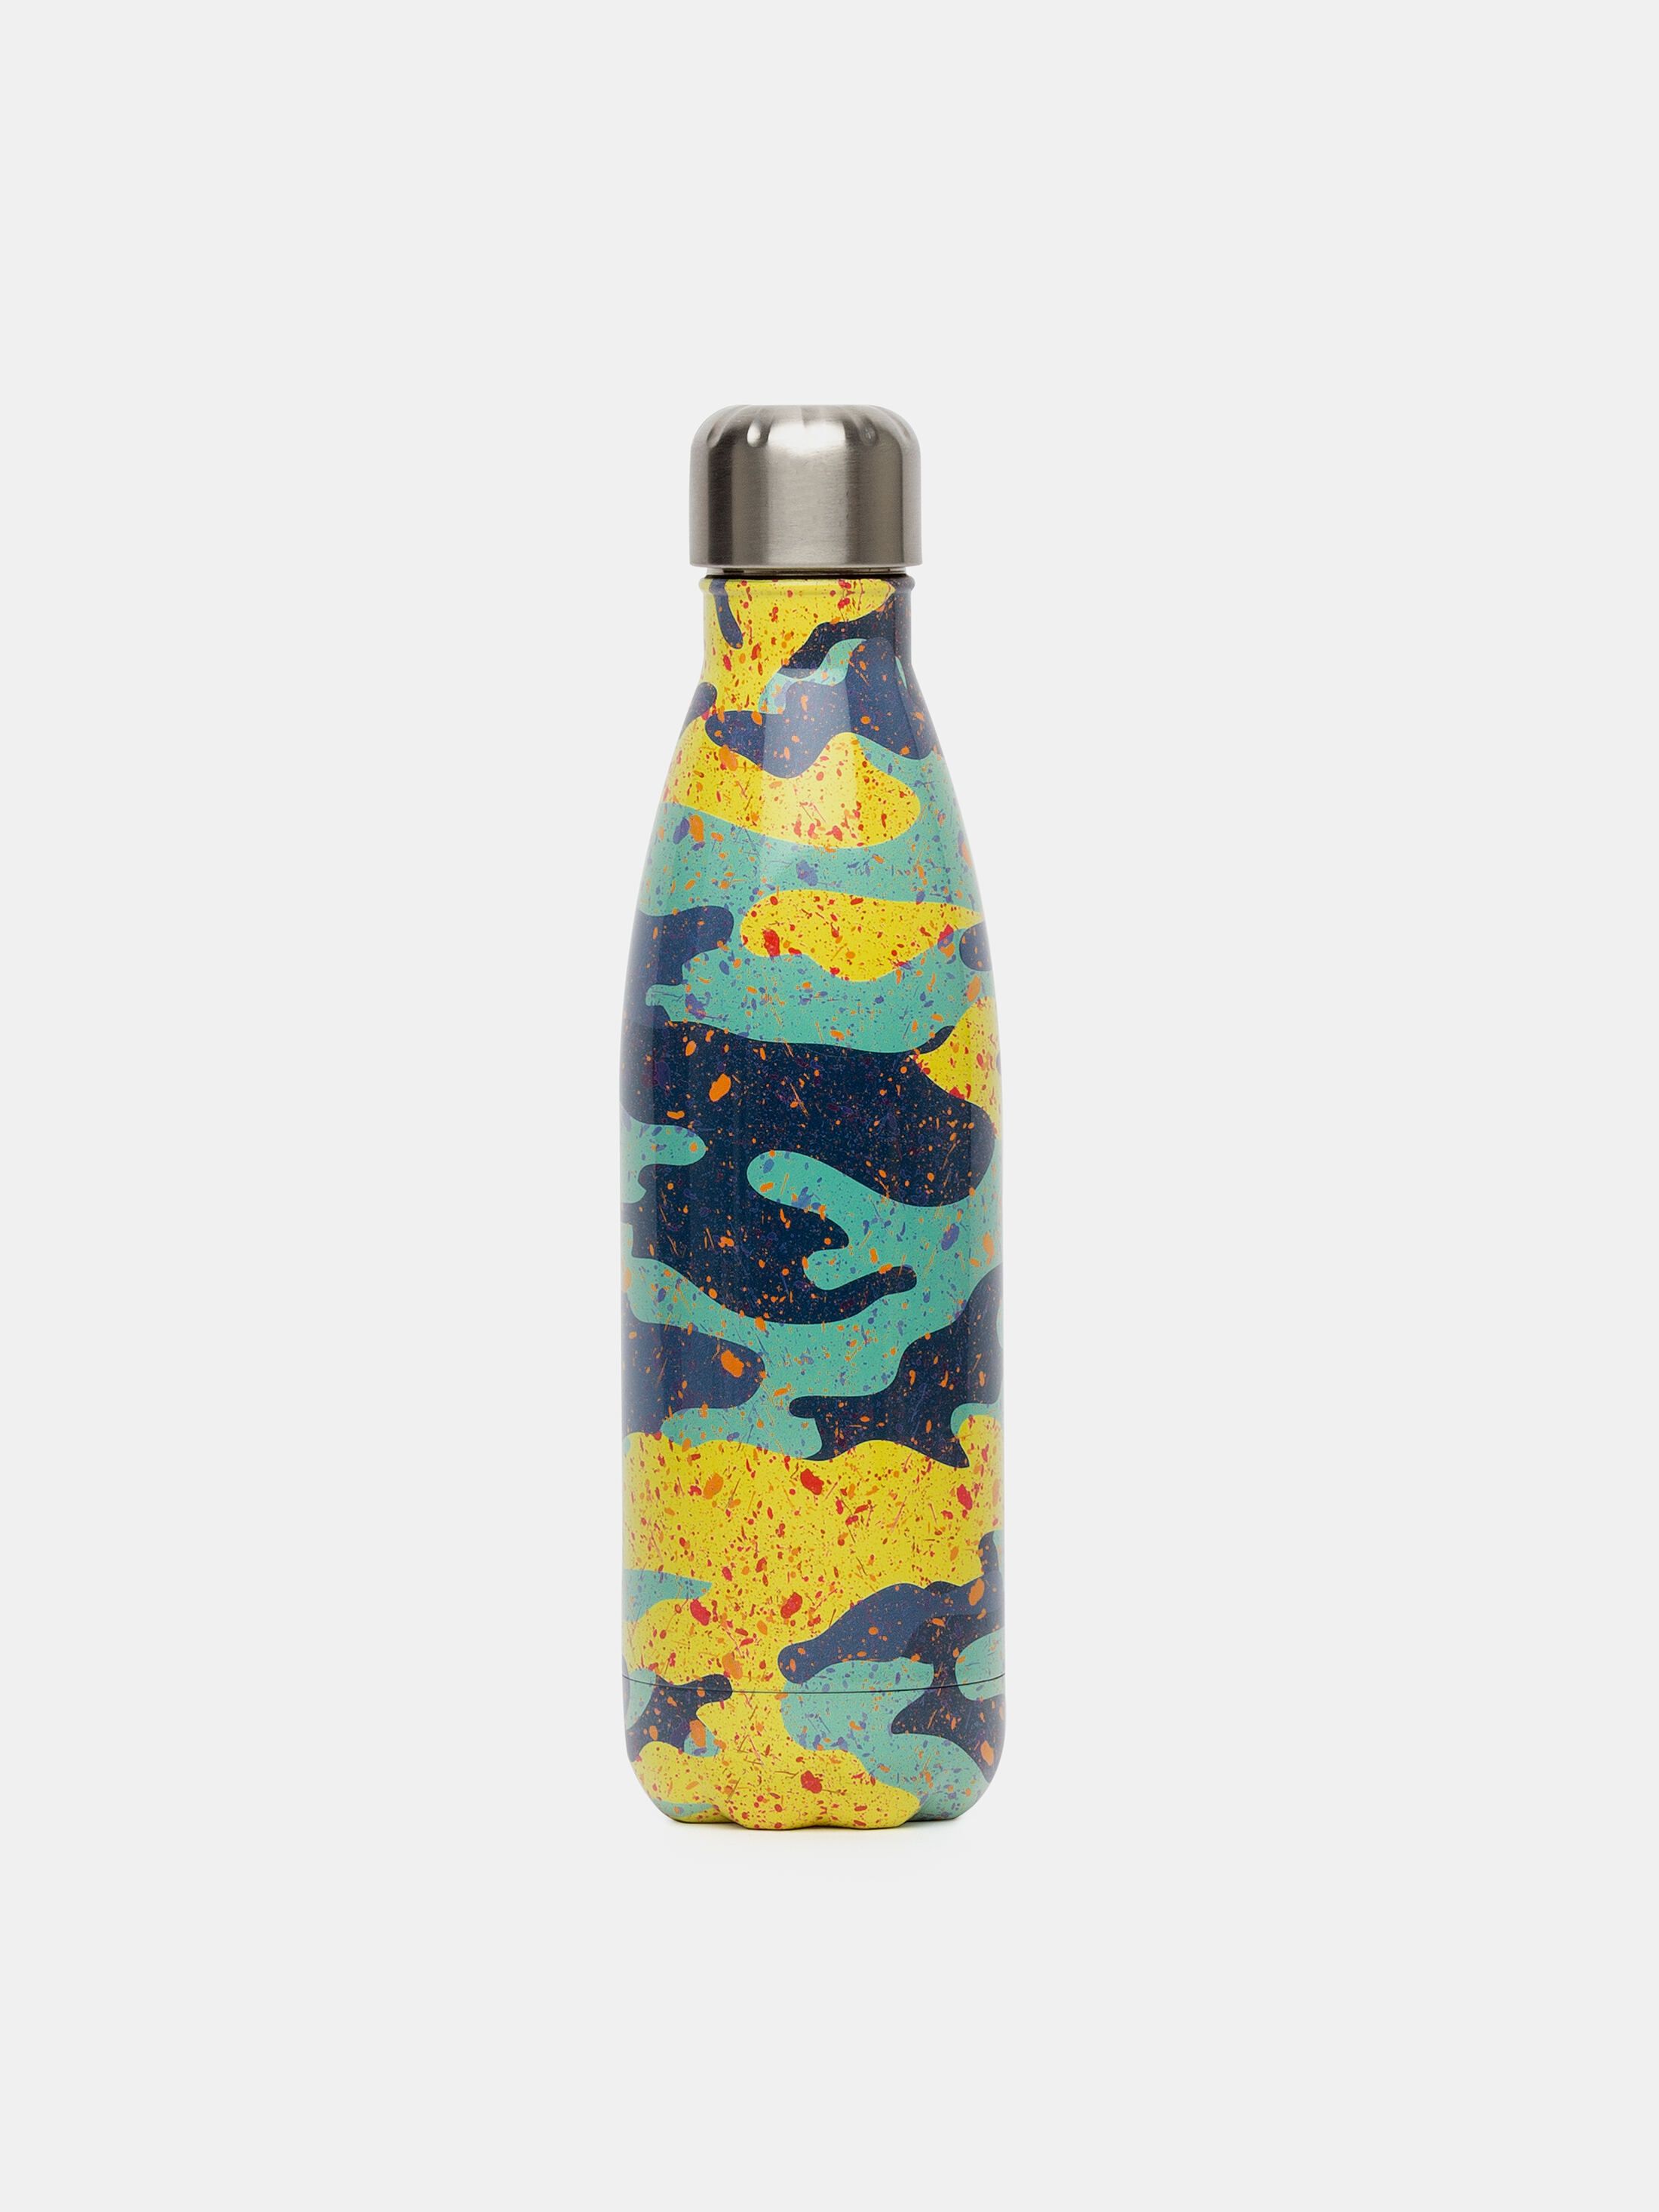 https://raven.contrado.app/resources/images/2021-4/176707/custom-insulated-water-bottles-1161524_l.jpg?auto=format&q=80&max-w=2200